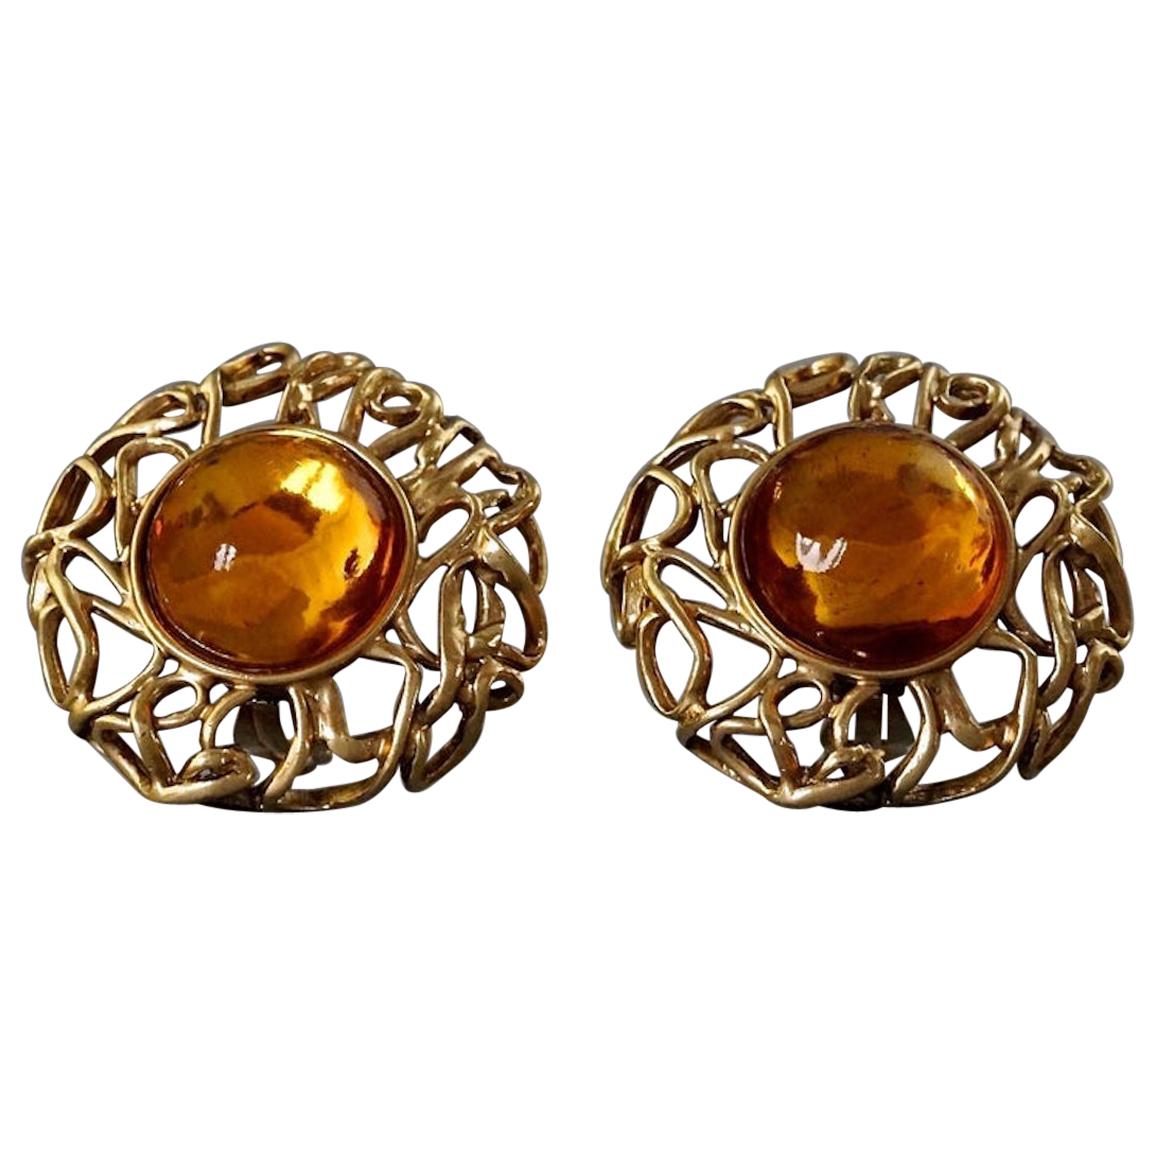 YVES SAINT LAURENT Ysl by Robert Goossens Citrine Cabochon Wire Cage Earrings